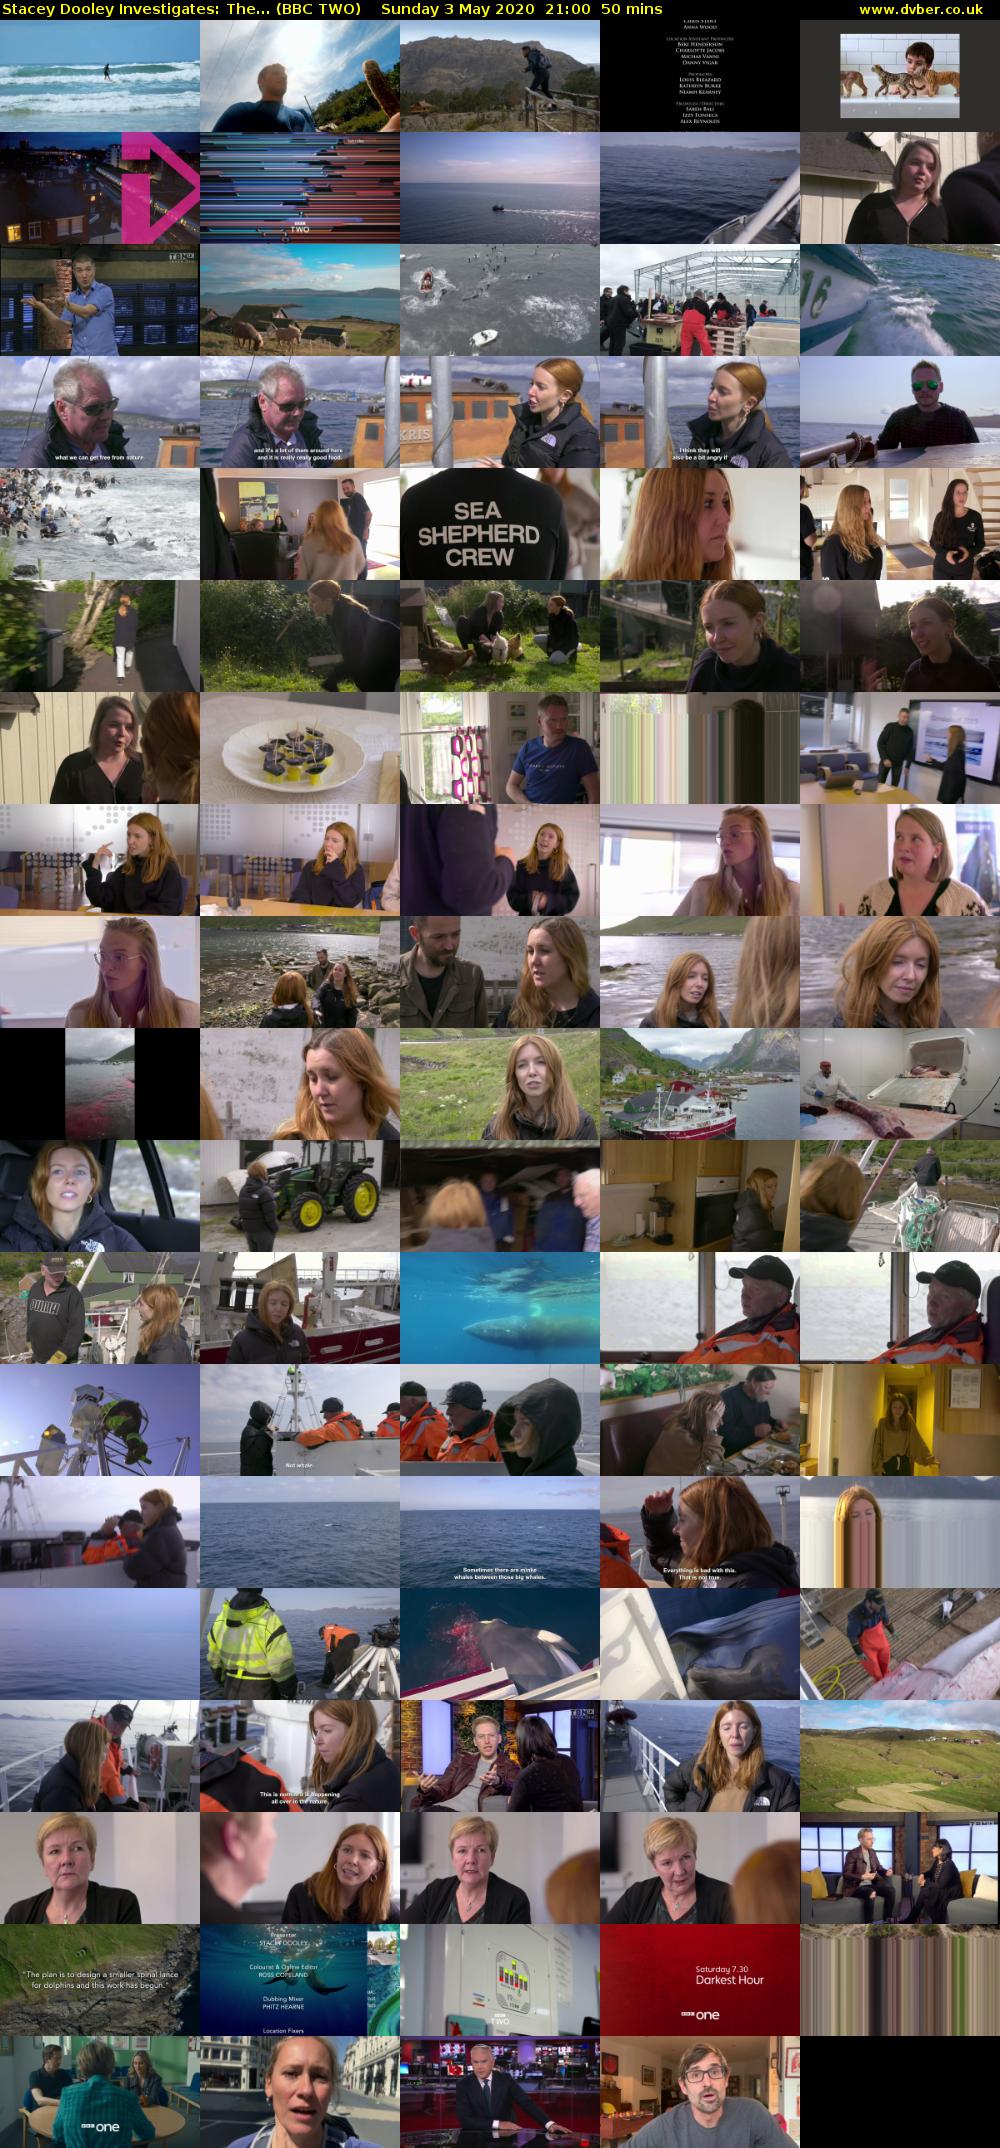 Stacey Dooley Investigates: The... (BBC TWO) Sunday 3 May 2020 21:00 - 21:50